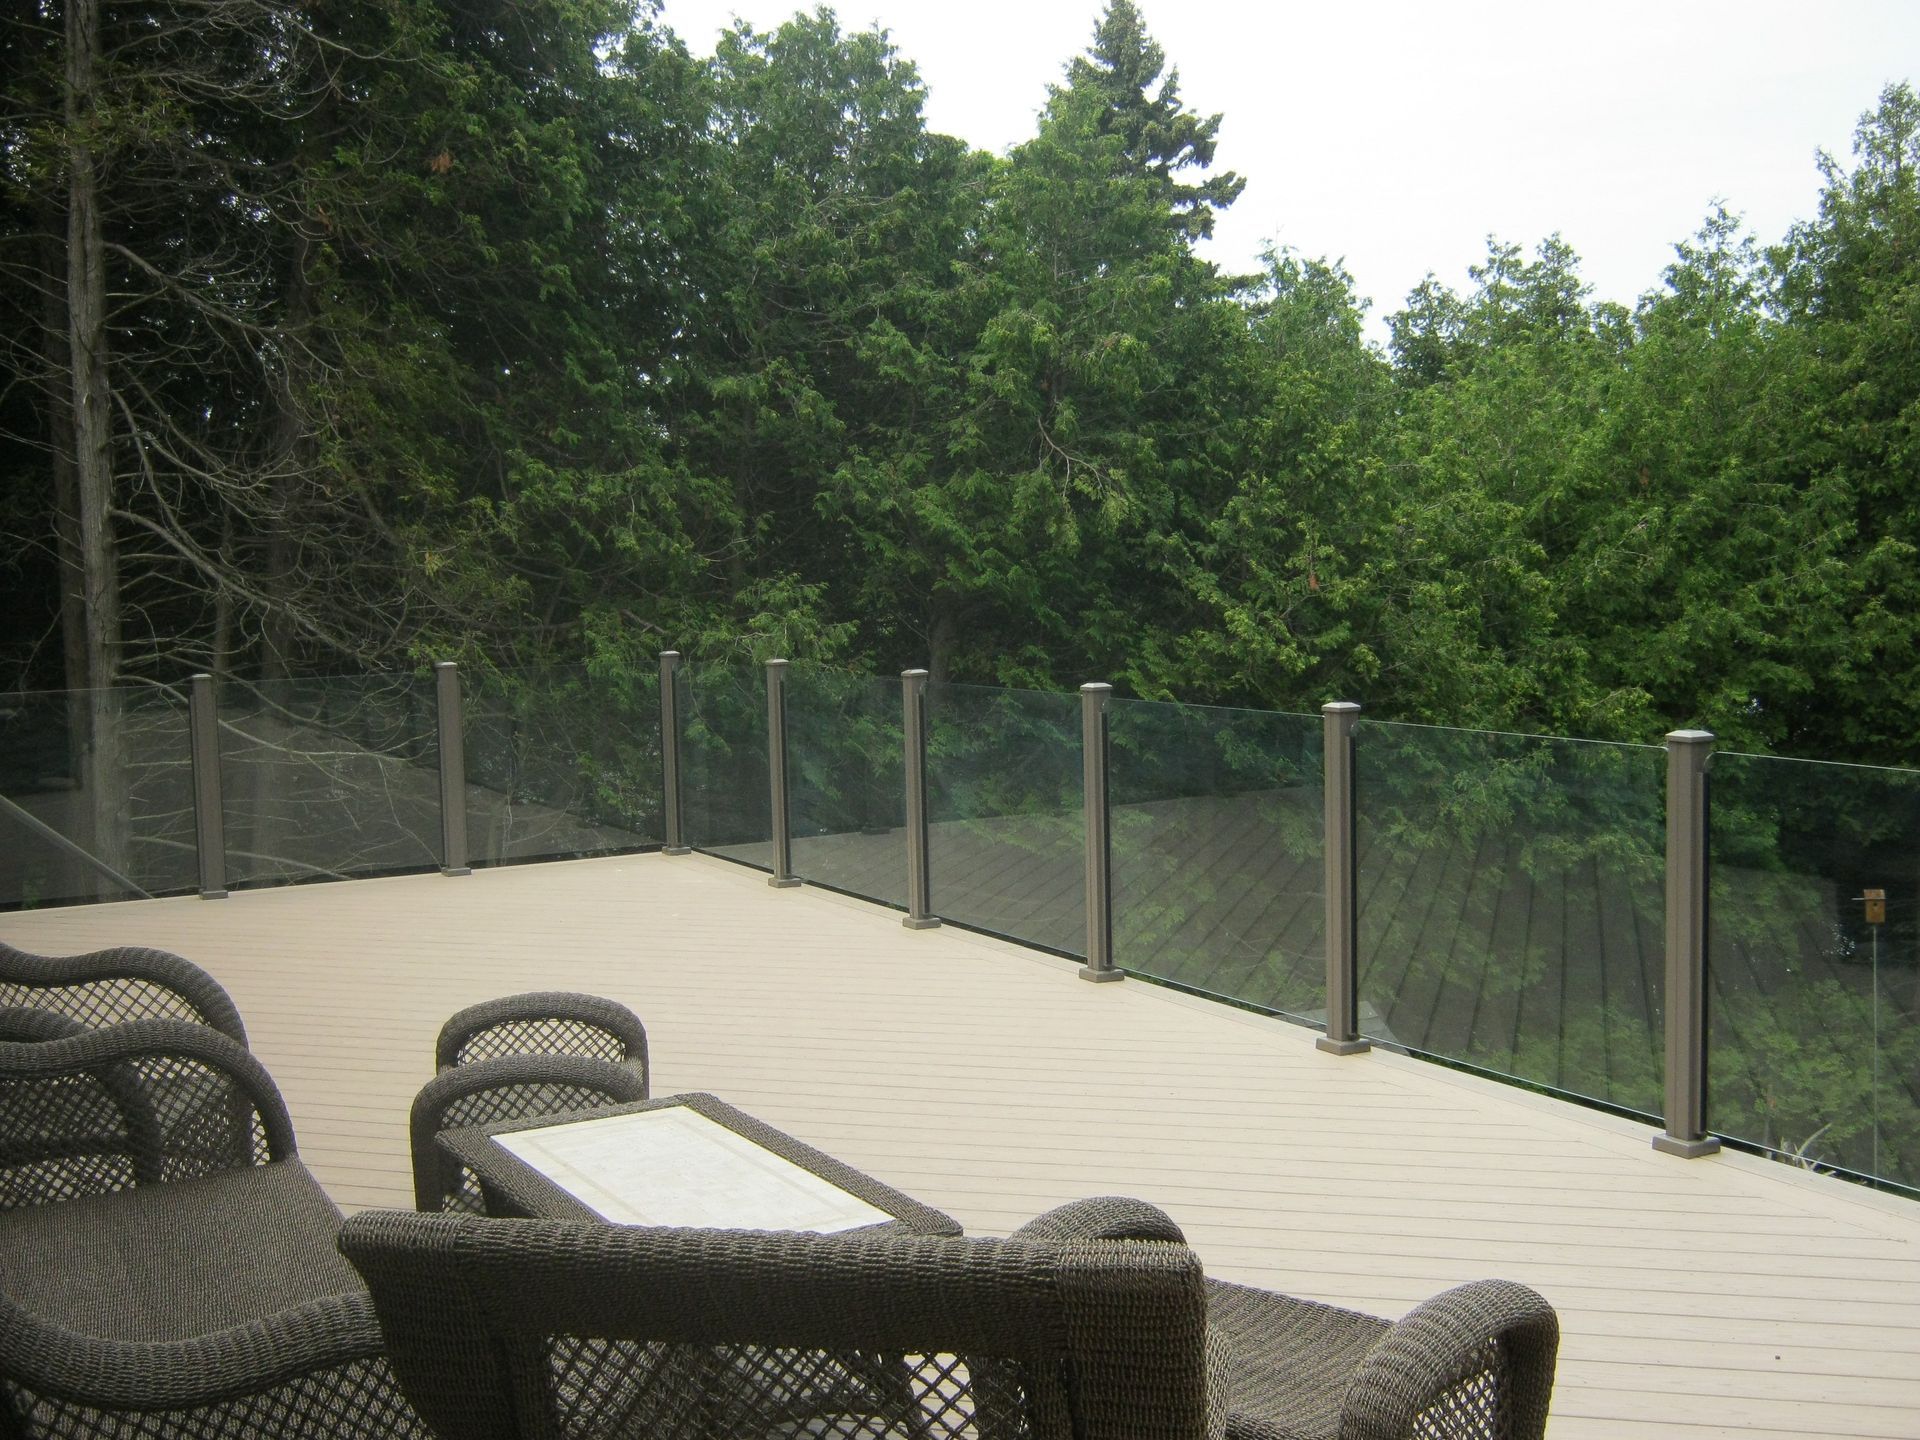 A deck with wicker furniture and a glass railing